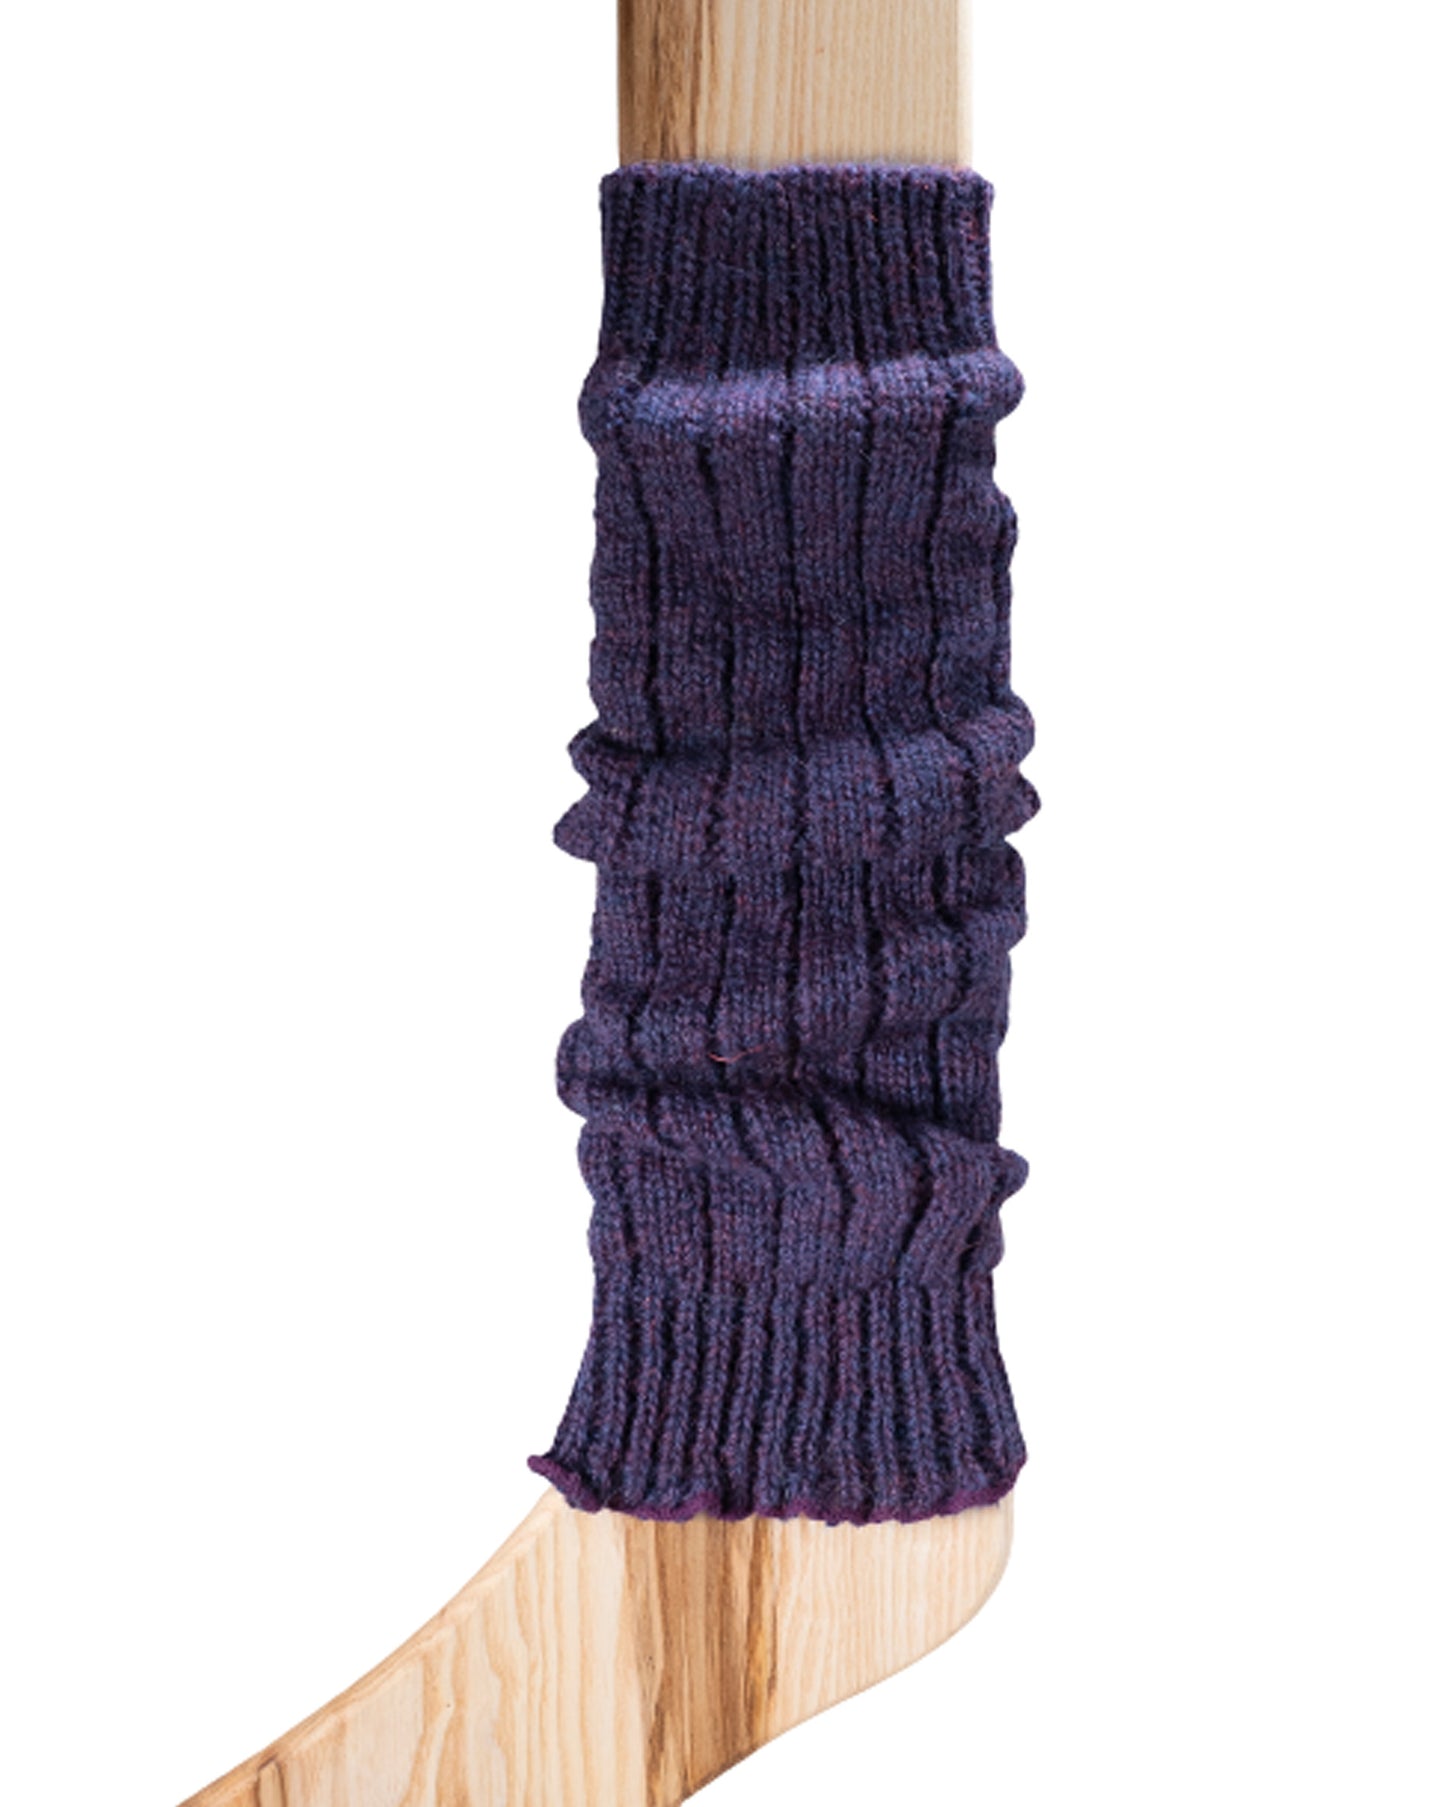 Connemara Socks - Dark purple chunky ribbed knitted leg warmers made of 100% wool, perfect for keeping your legs and arms warm during cold Winters. Made in Ireland.